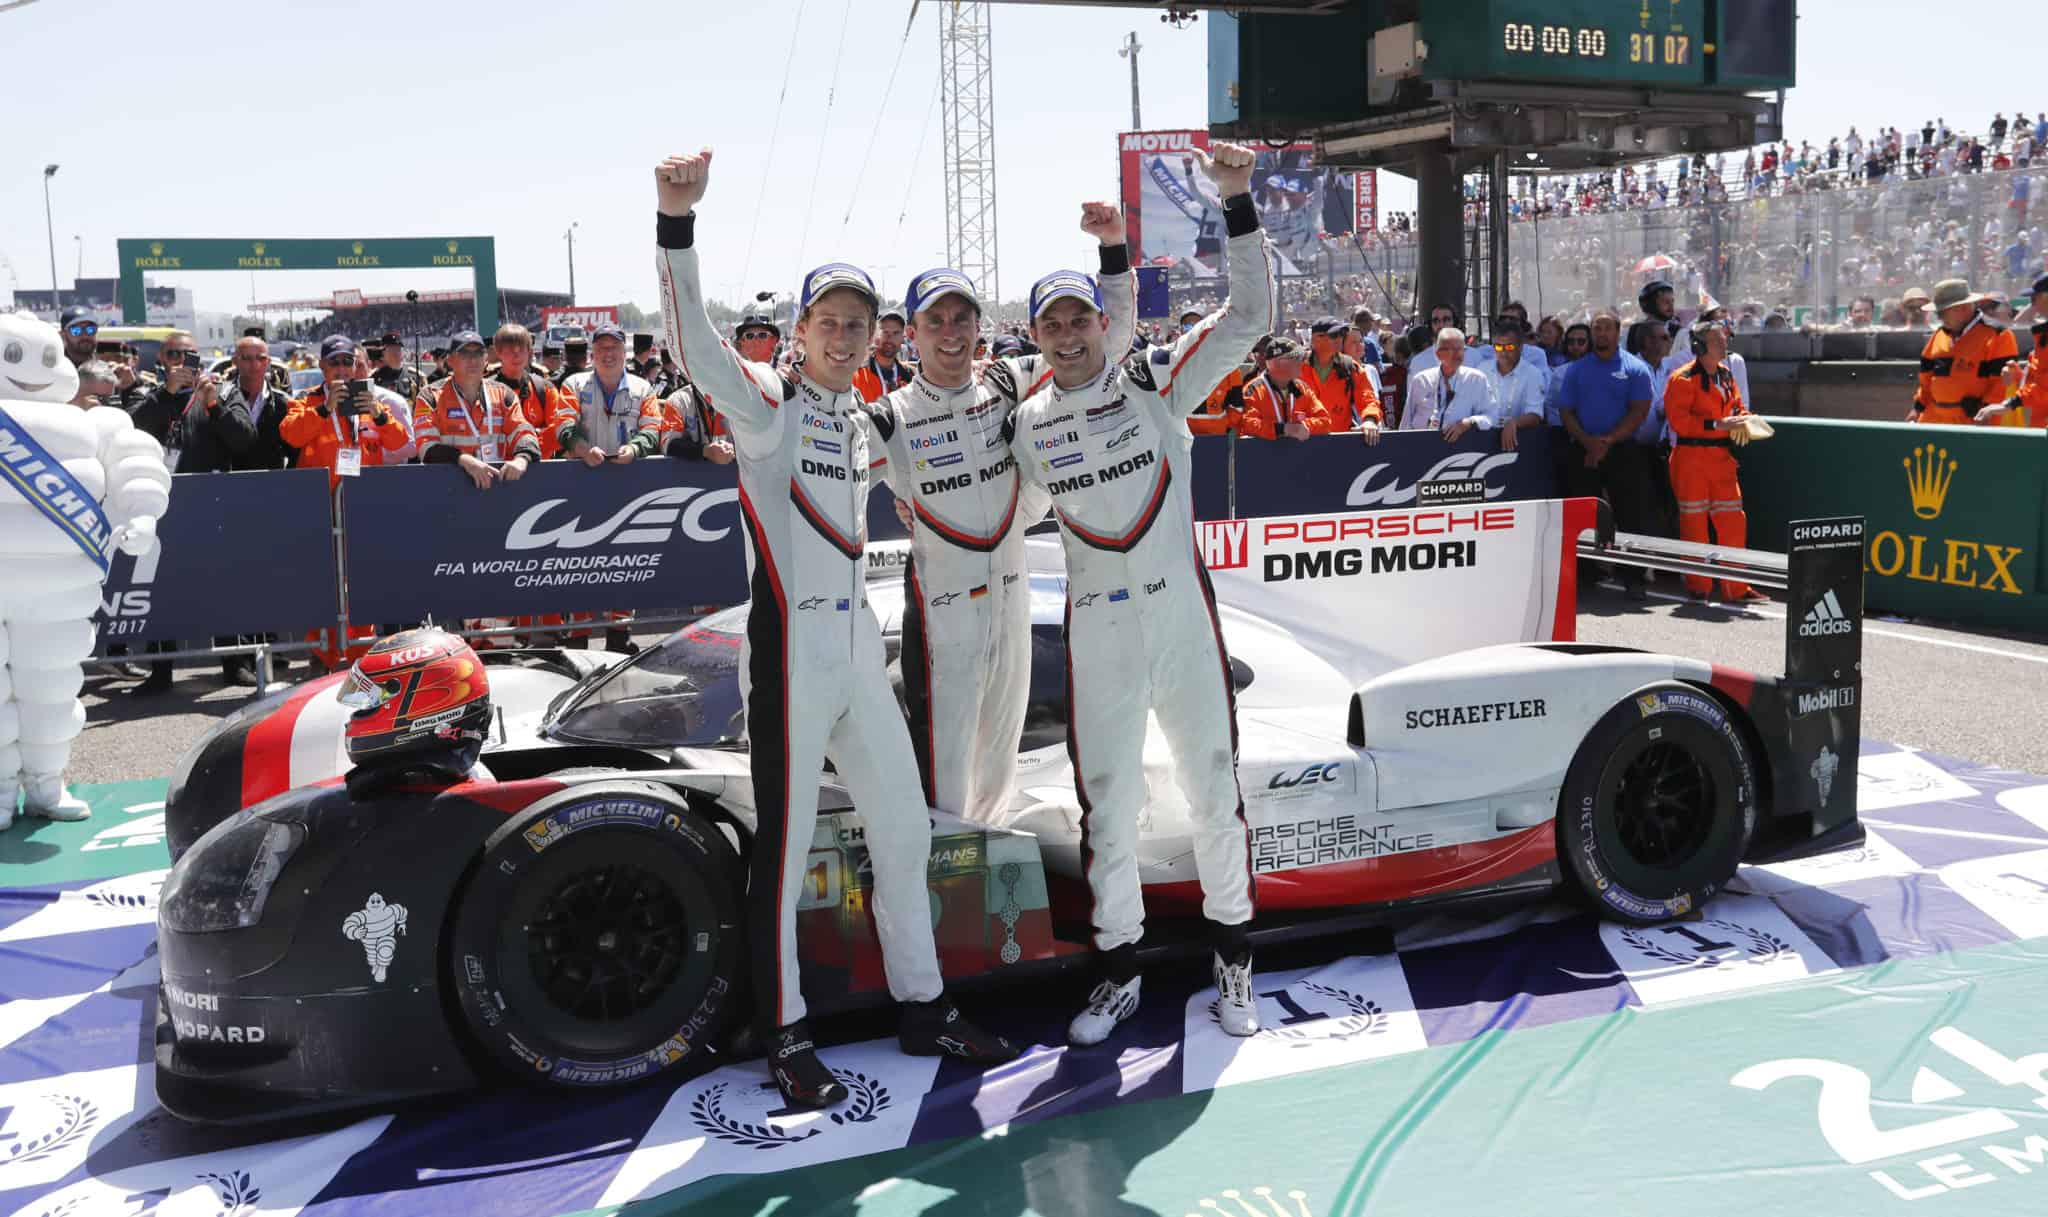 Outstanding 19th overall victory for Porsche Motorsport  at the 24 Hours of Le Mans 2017